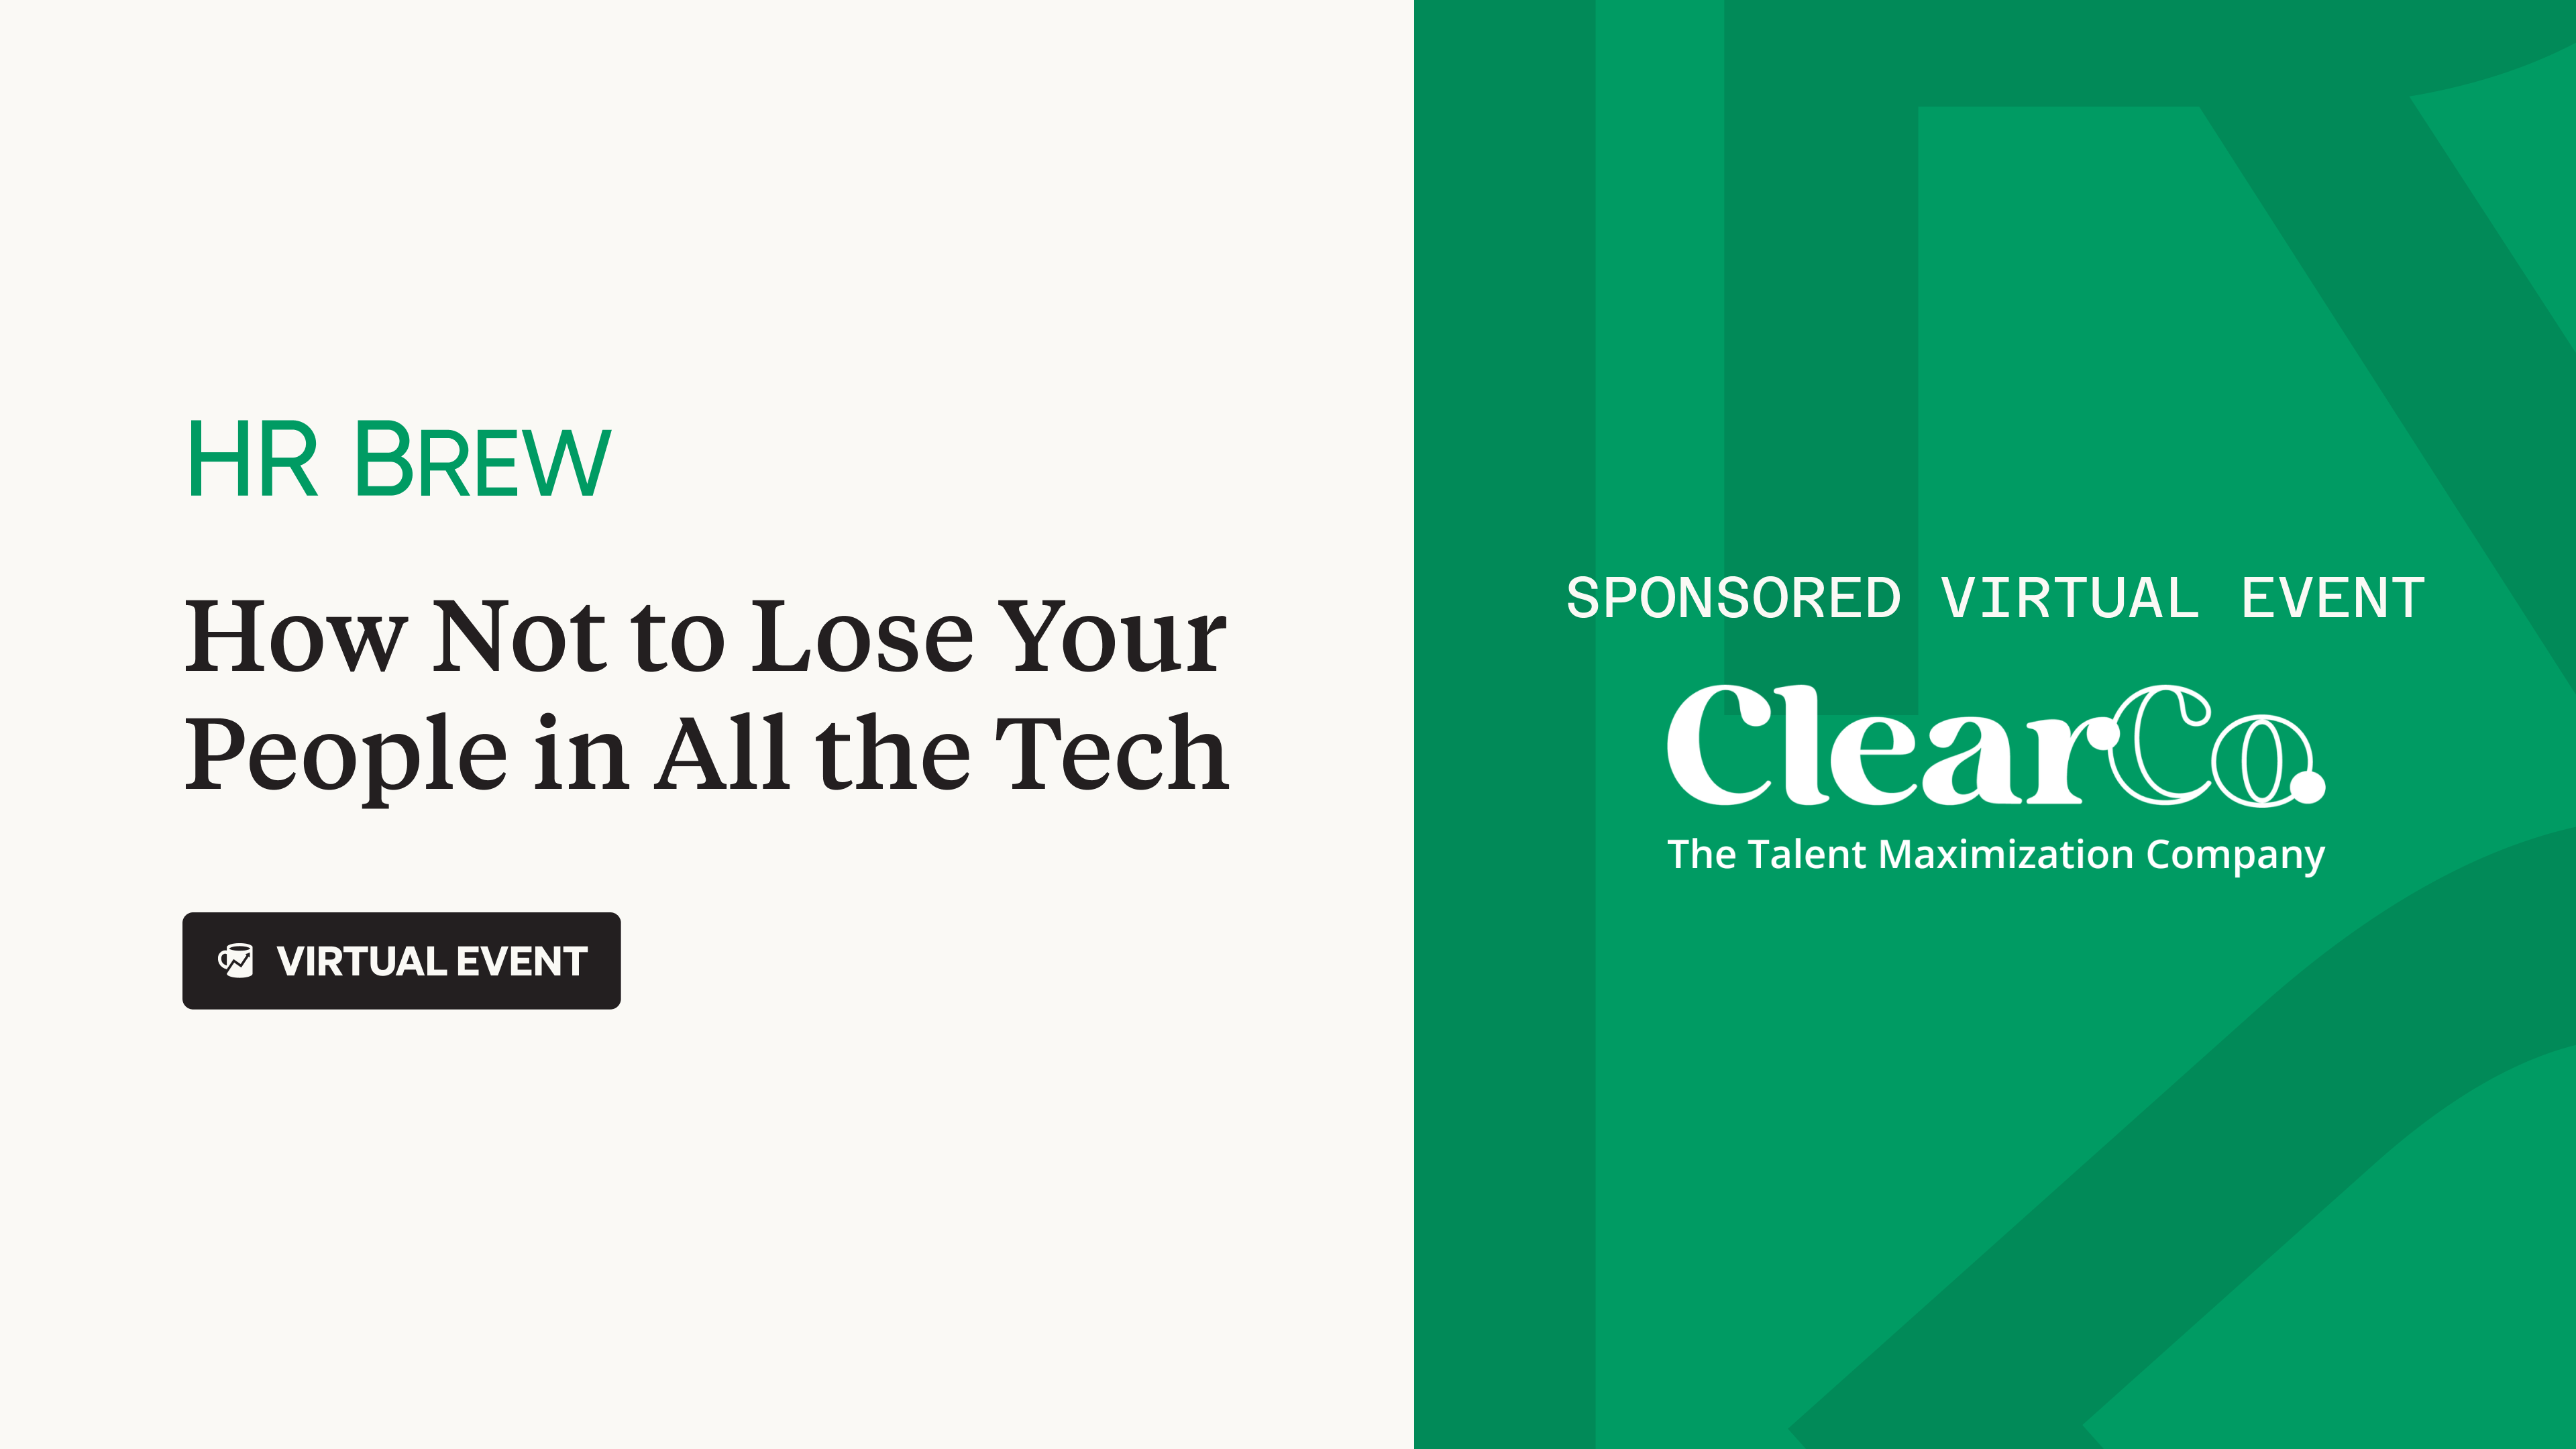 HR Brew virtual event "How Not to Lose Your People in All the Tech" sponsored by ClearCo